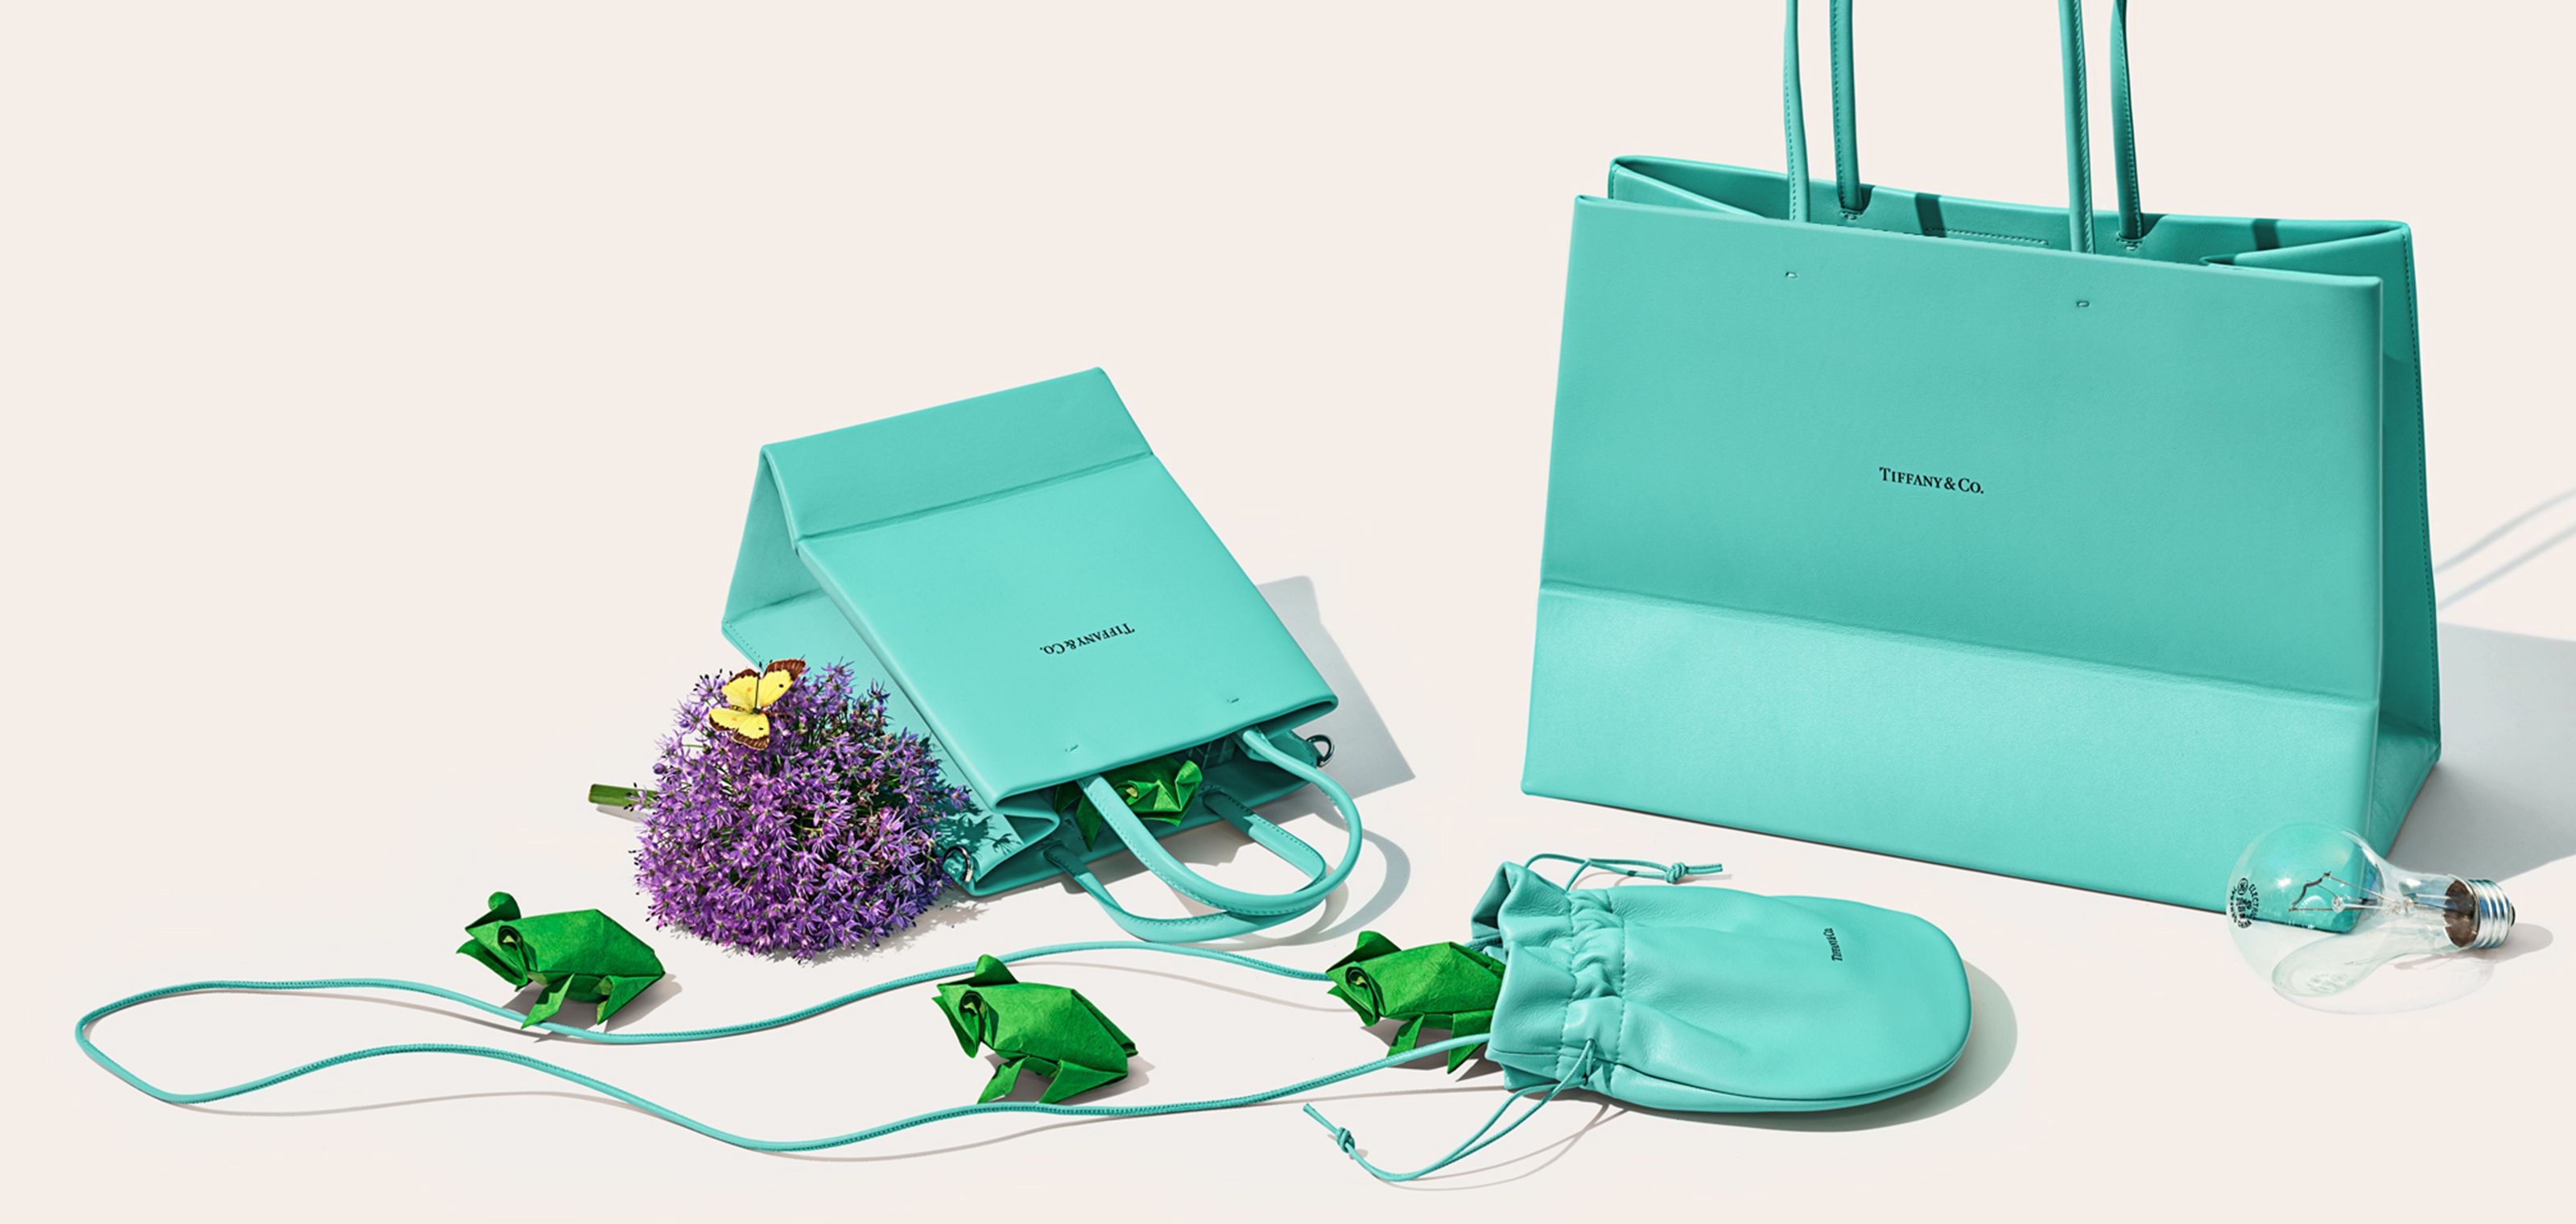 Tiffany & Co. Has Transformed Their Iconic Shopping Bag Into